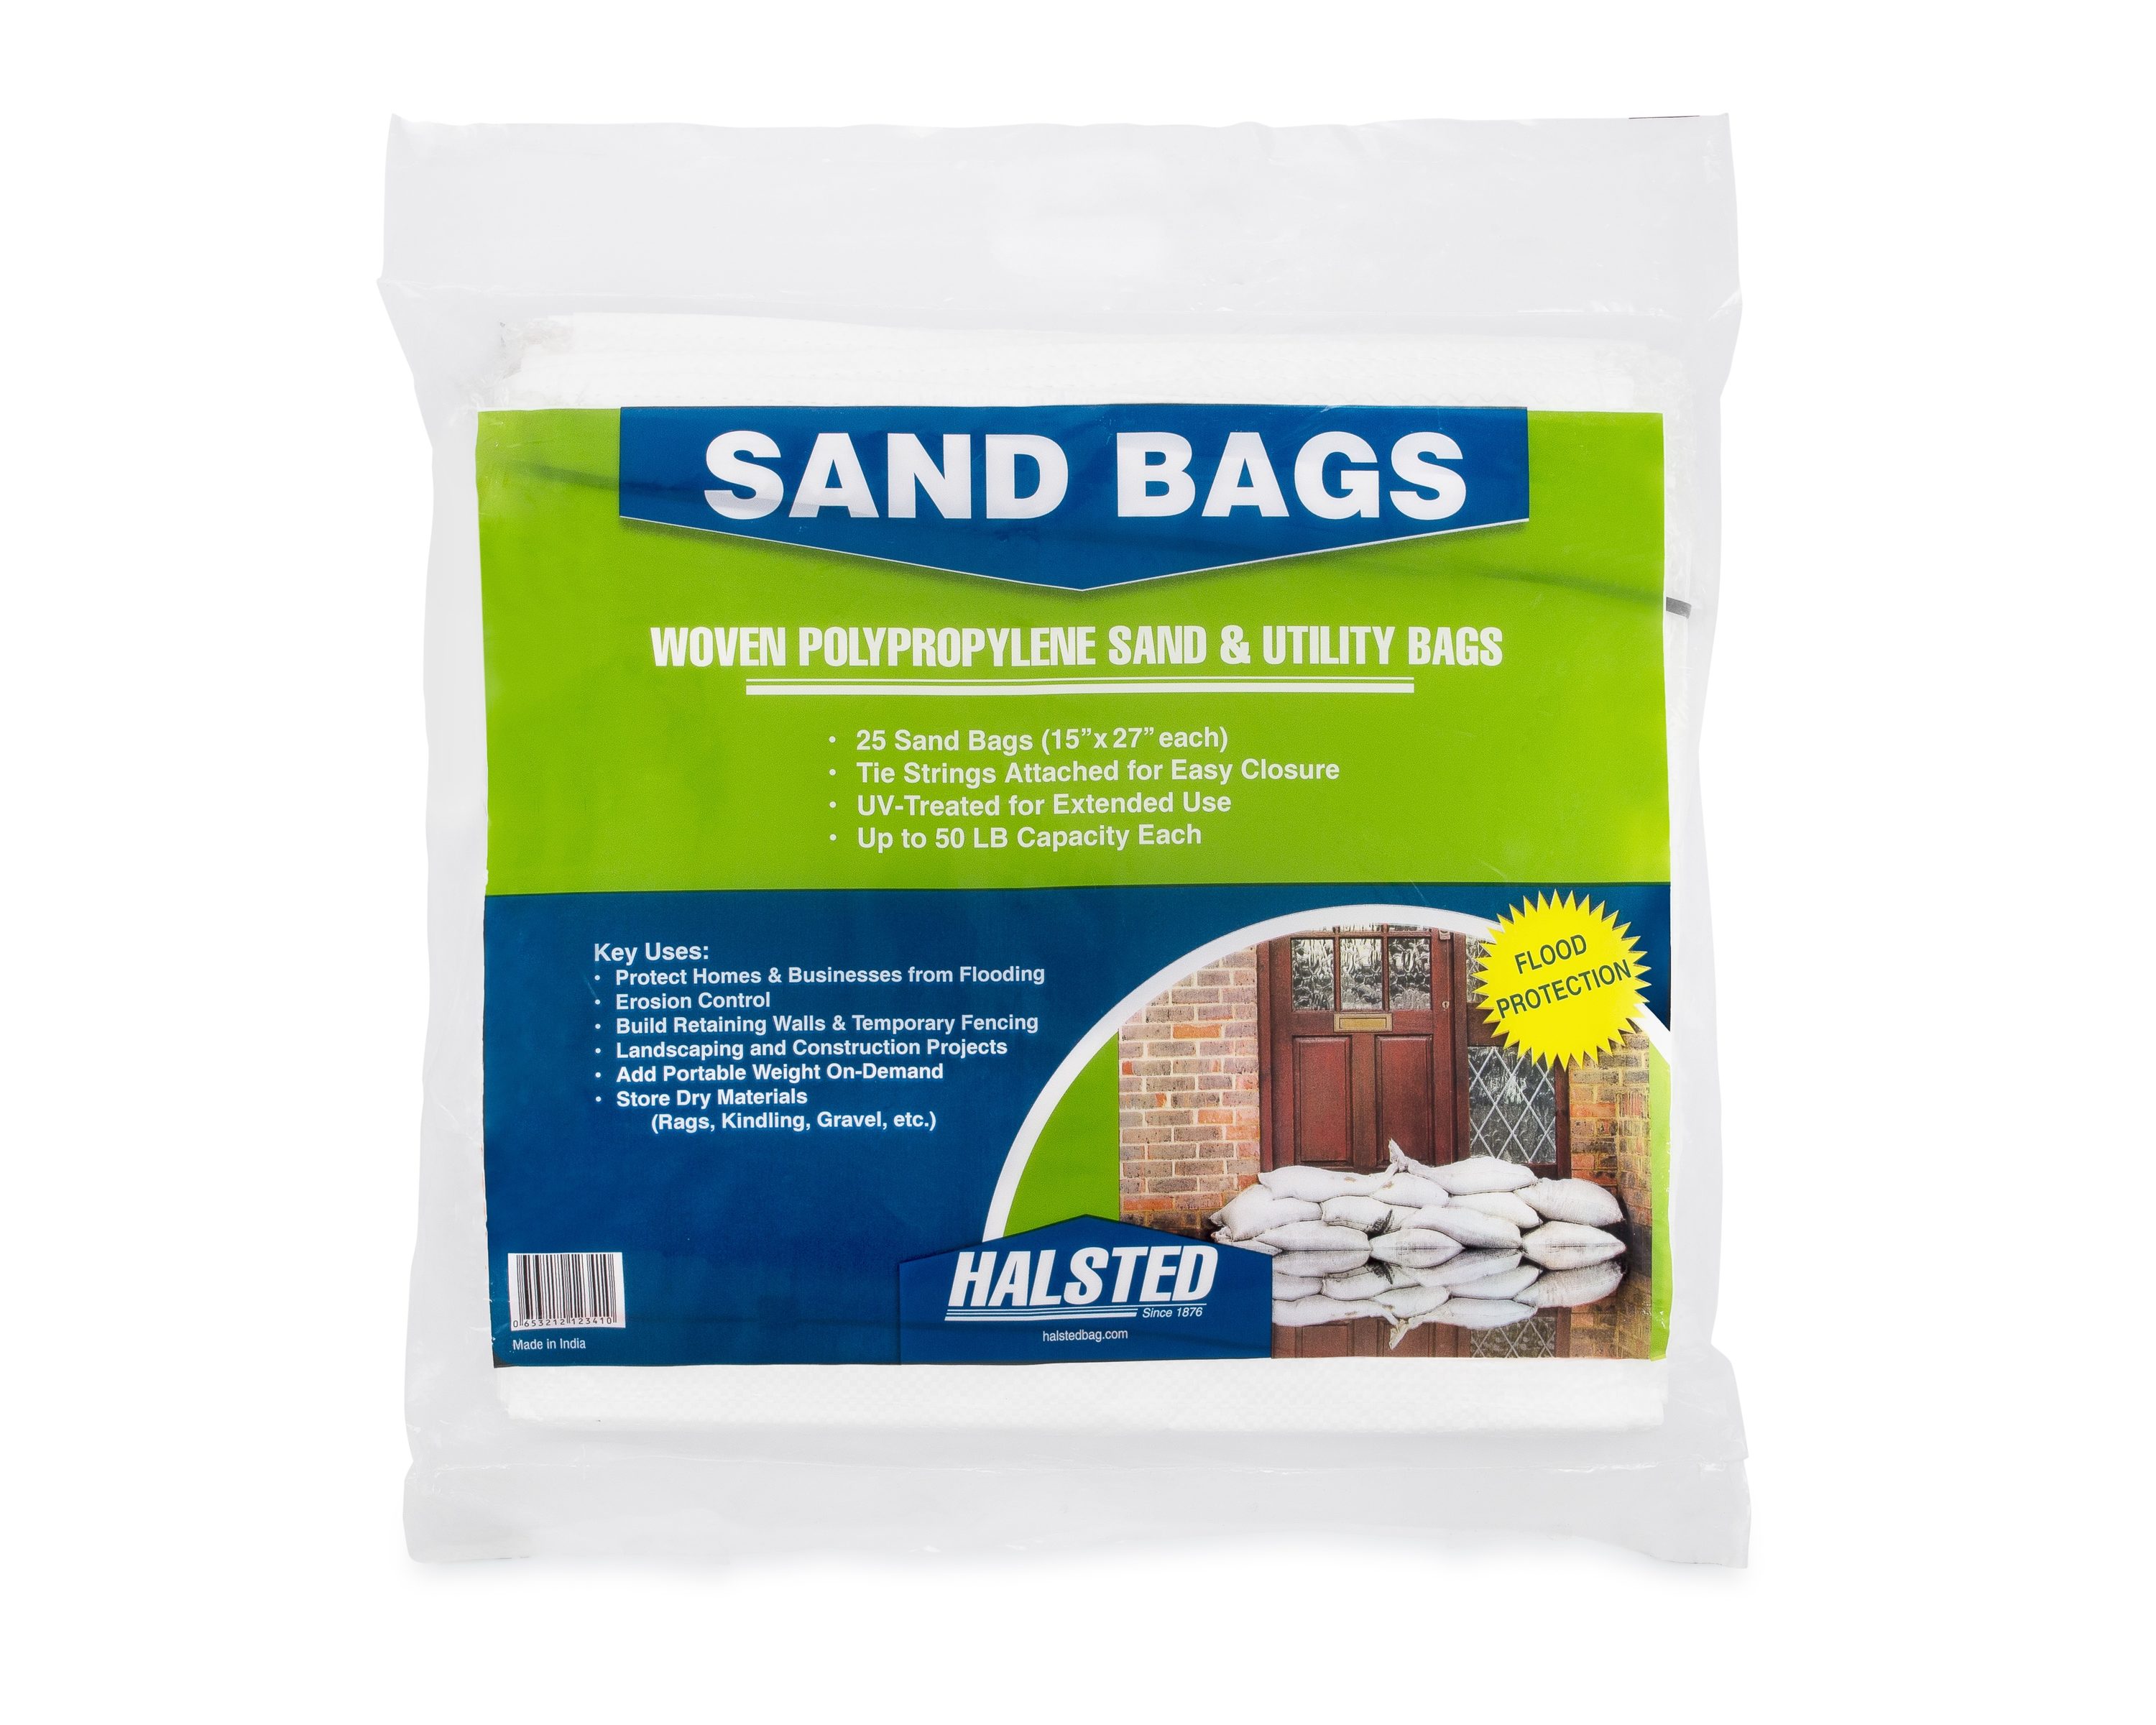 15 x 27, 10 Pack Ties Included Heavy Duty Empty White Woven Polypropylene Sandbags for Flood Control 